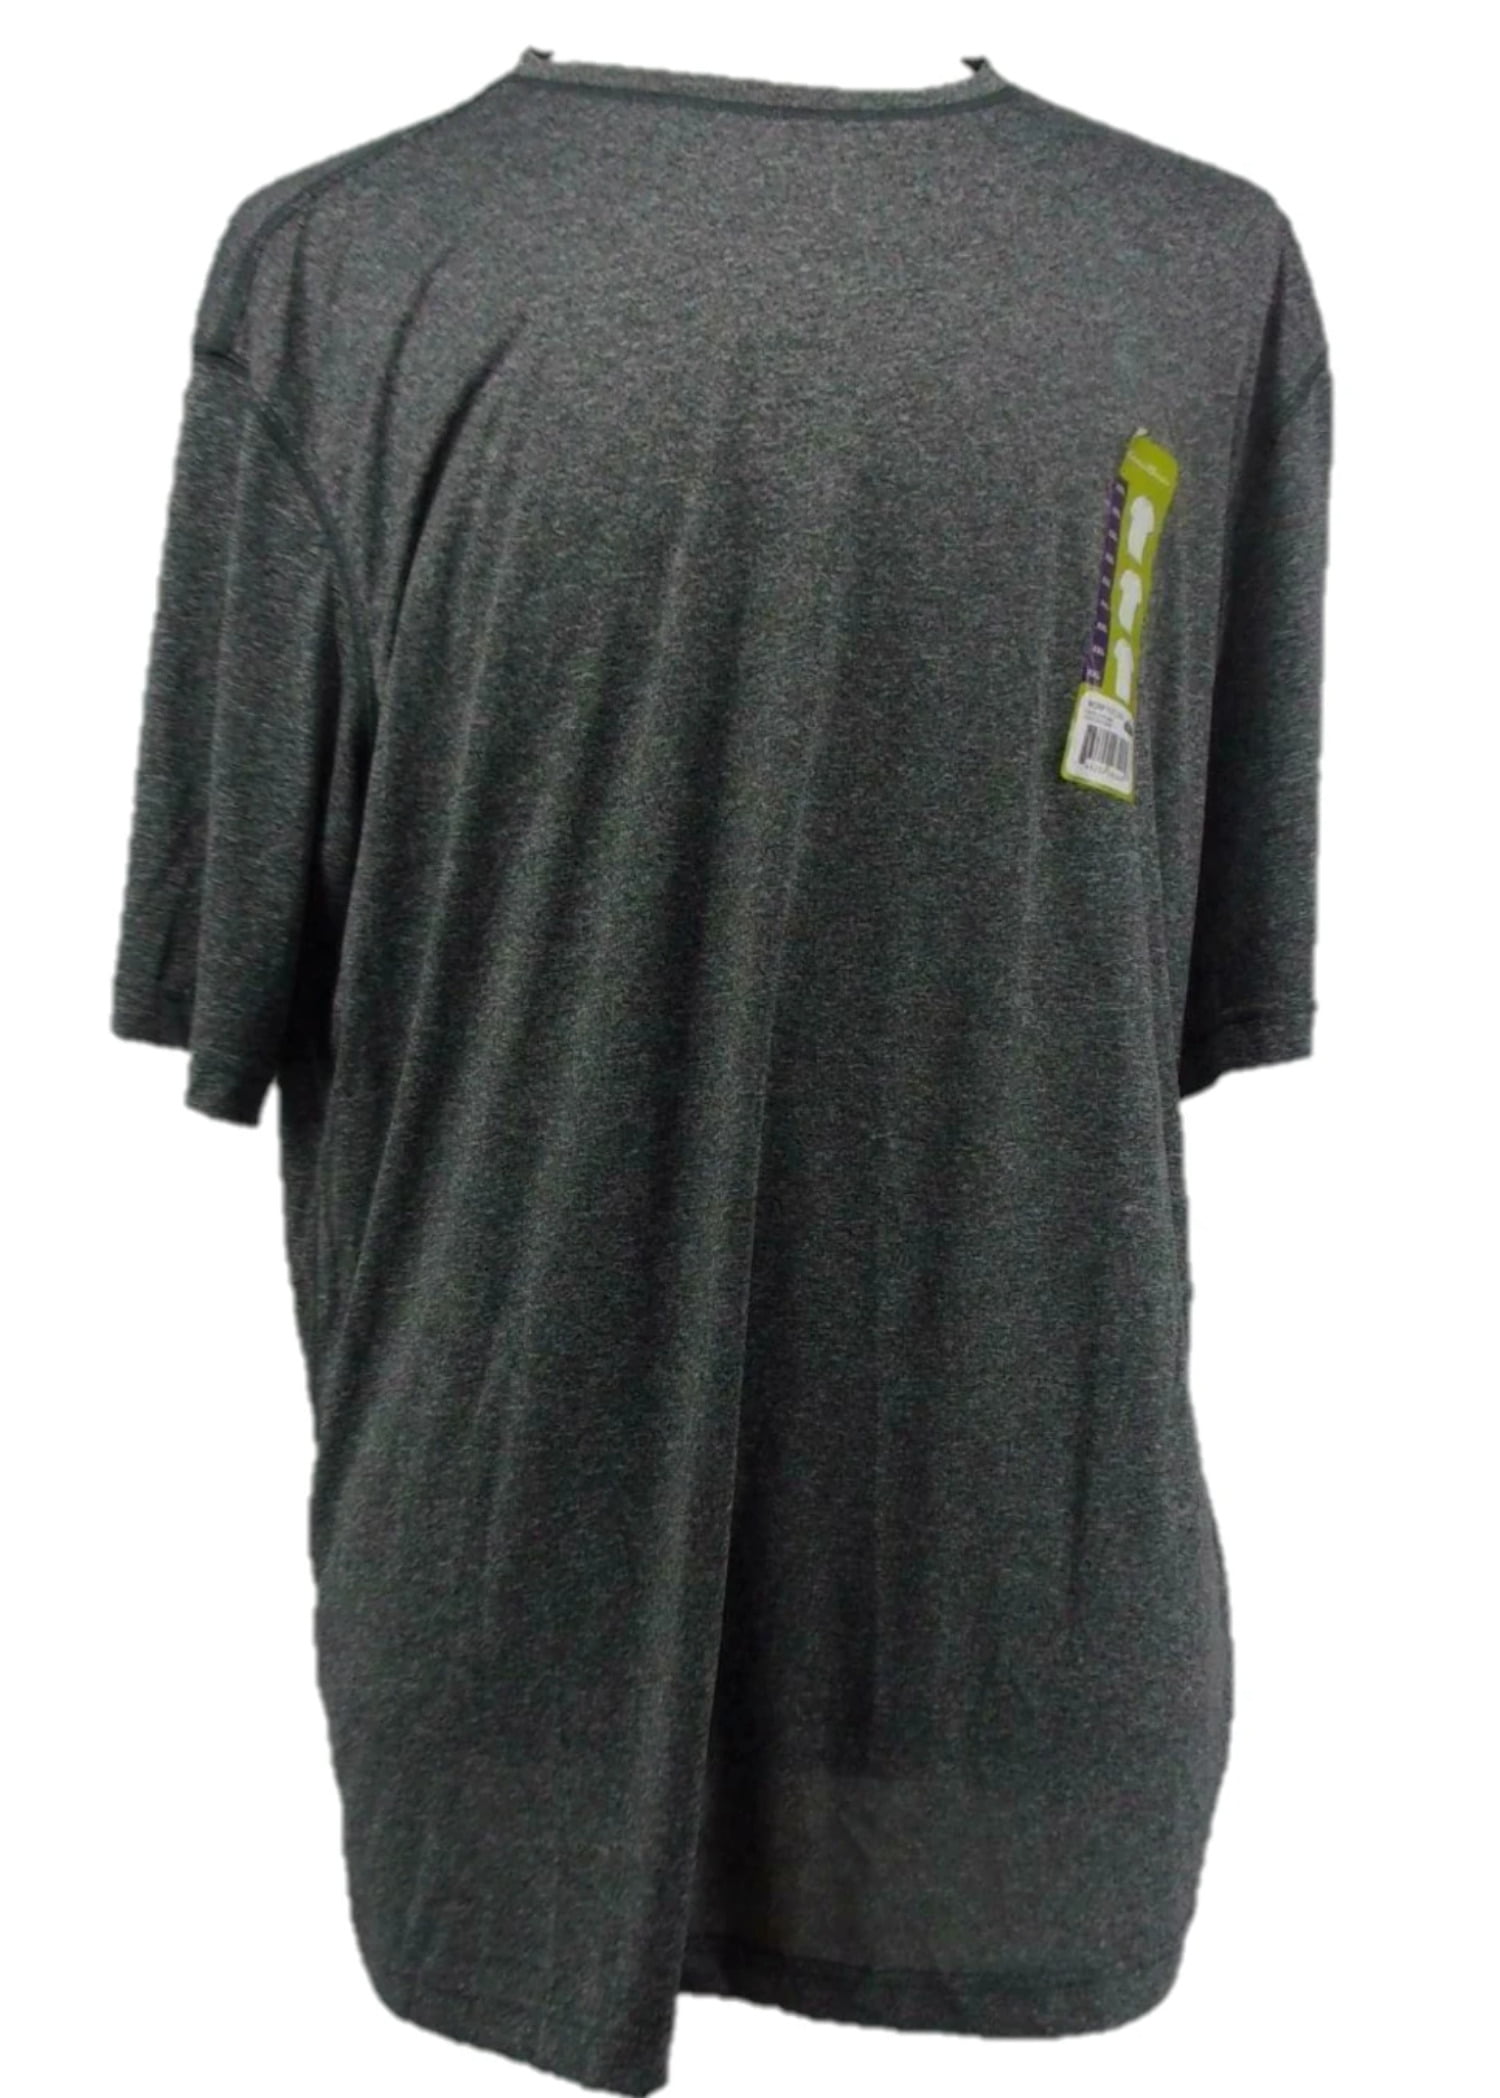 NEW Eddie Bauer Men's 2-Pack Ultra Soft Graphic Crew Tee T-Shirts Great Gift NWT